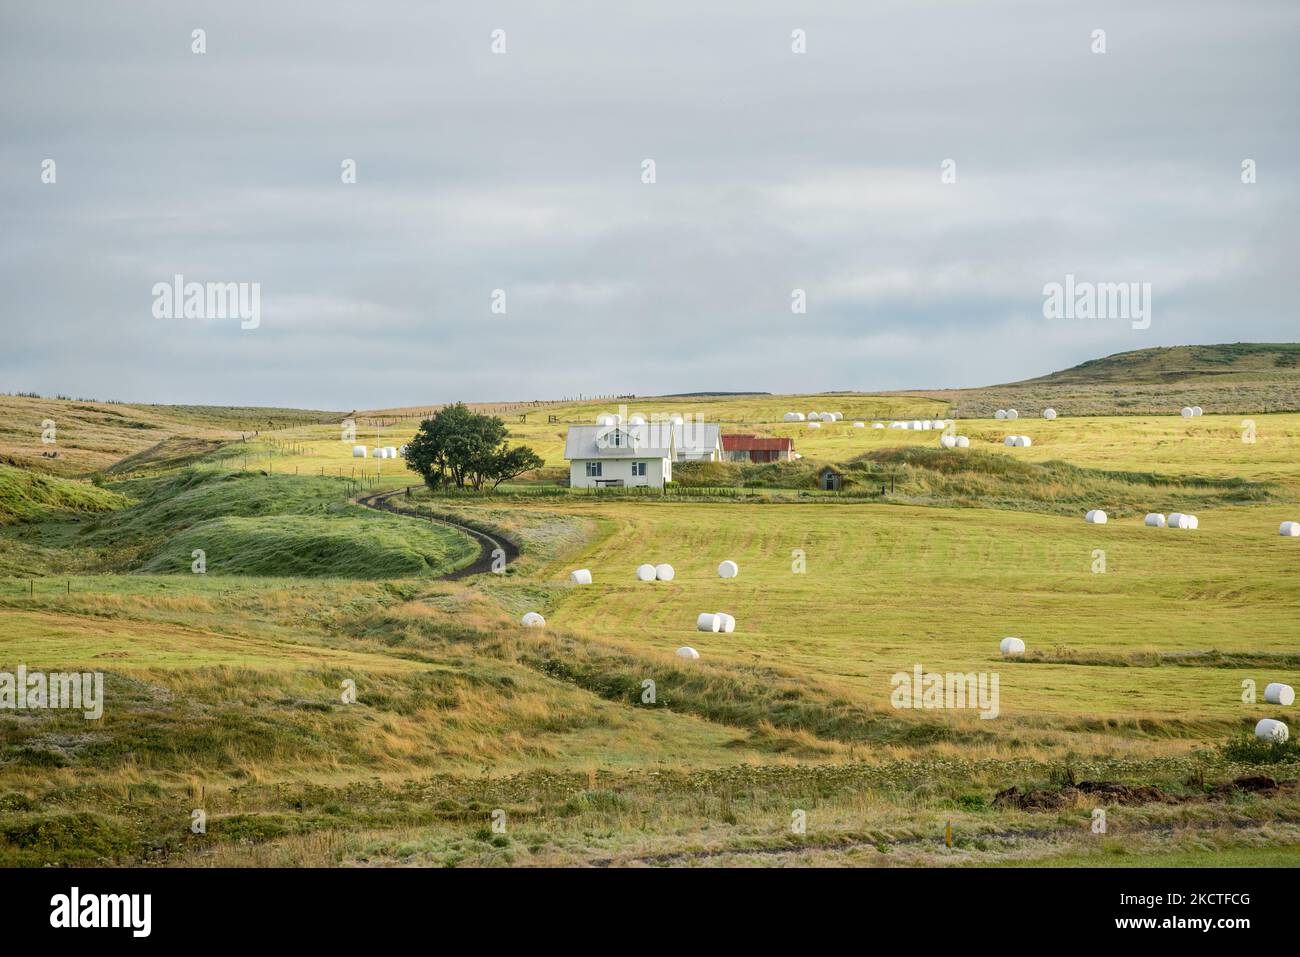 Farm at Hlidarendi countryside - renown from the Icelandic saga of Njal describing events between 960 and 1020 Stock Photo